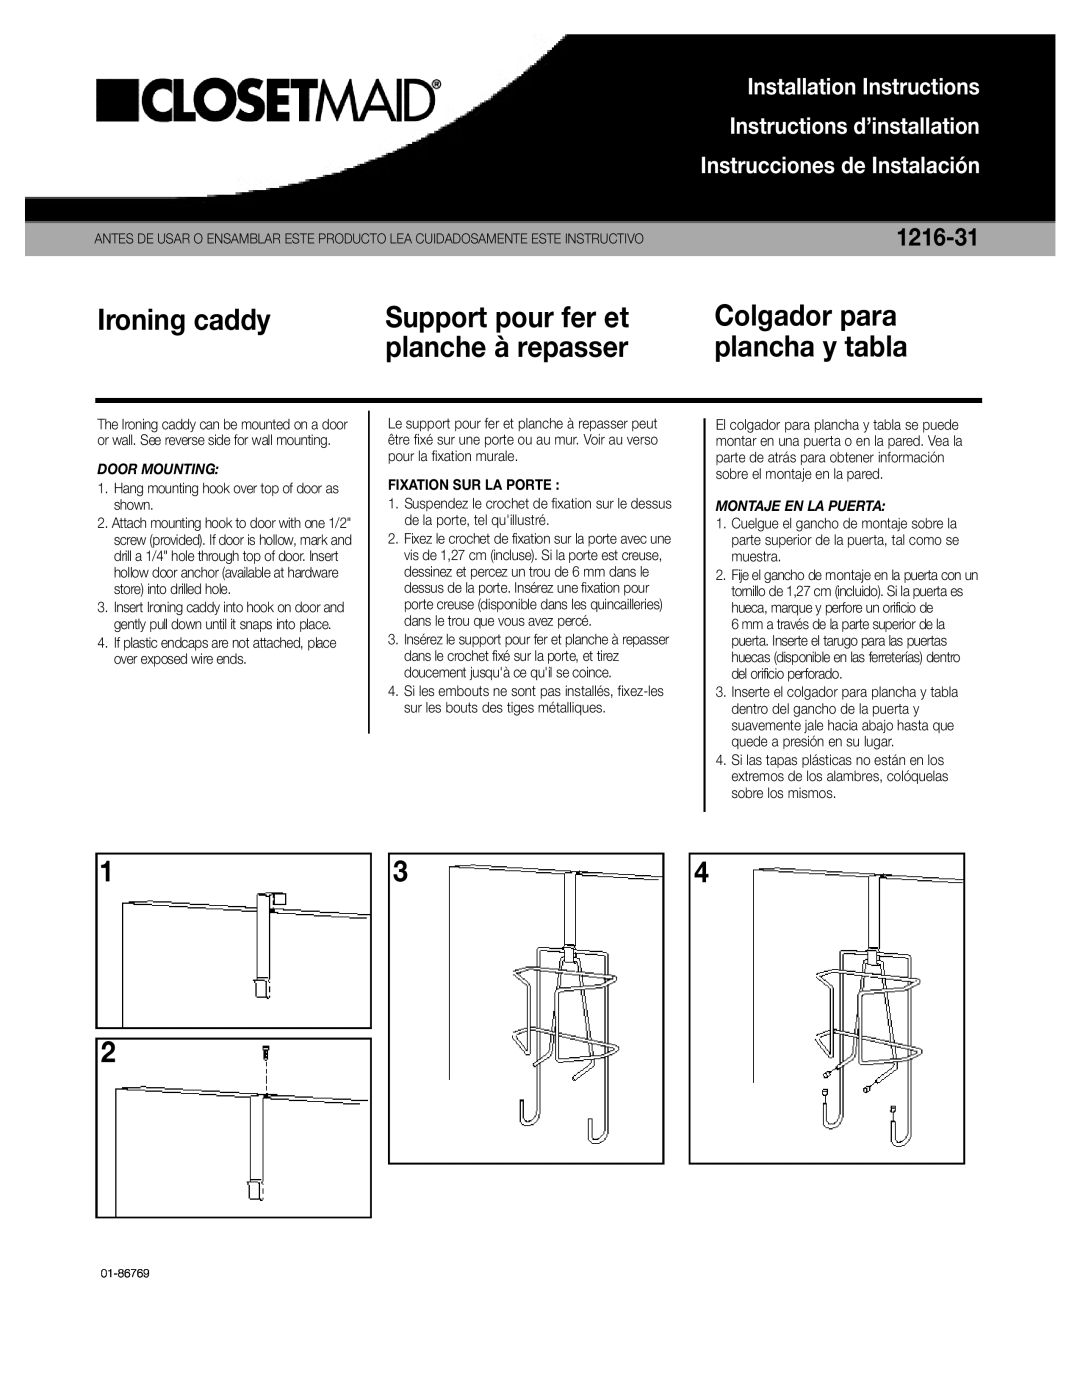 Closet Maid 1216-31 installation instructions Ironing caddy, Support pour fer et, planche à repasser, plancha y tabla 